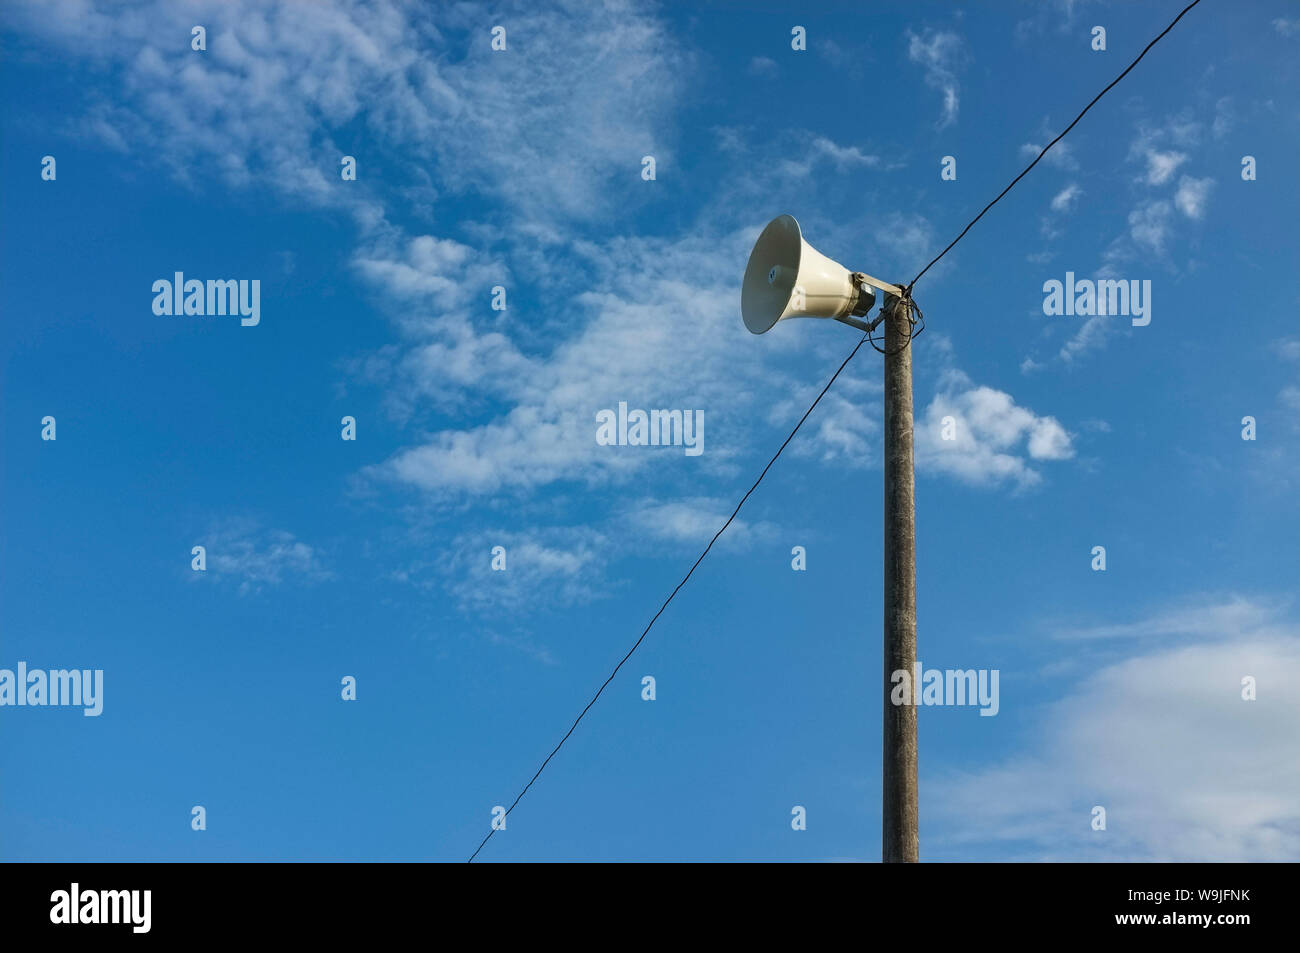 Loudspeaker atop a pole, against the sky. Stock Photo